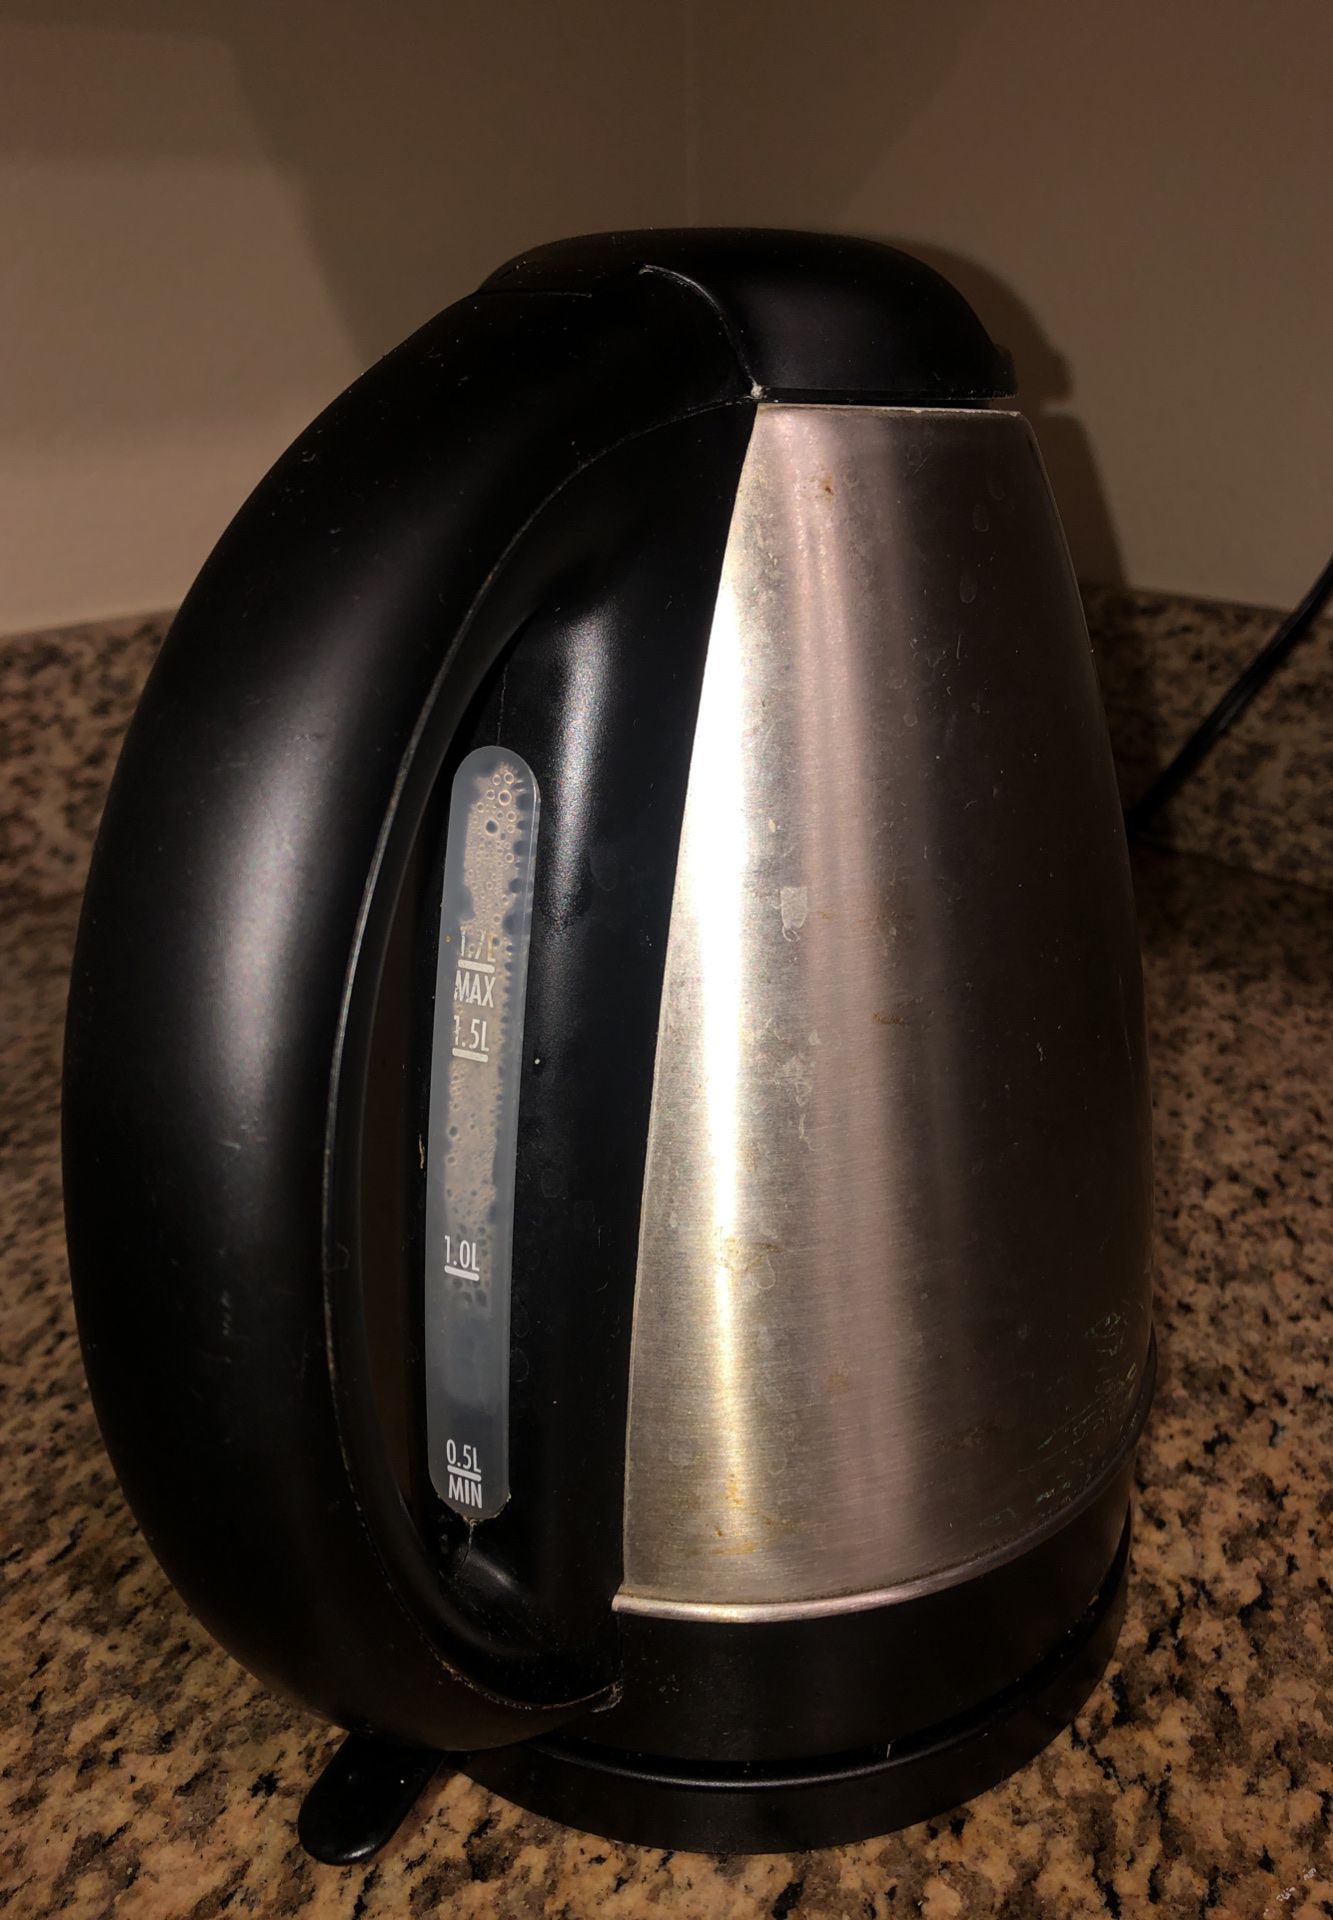 Water boiler just for $10!!!